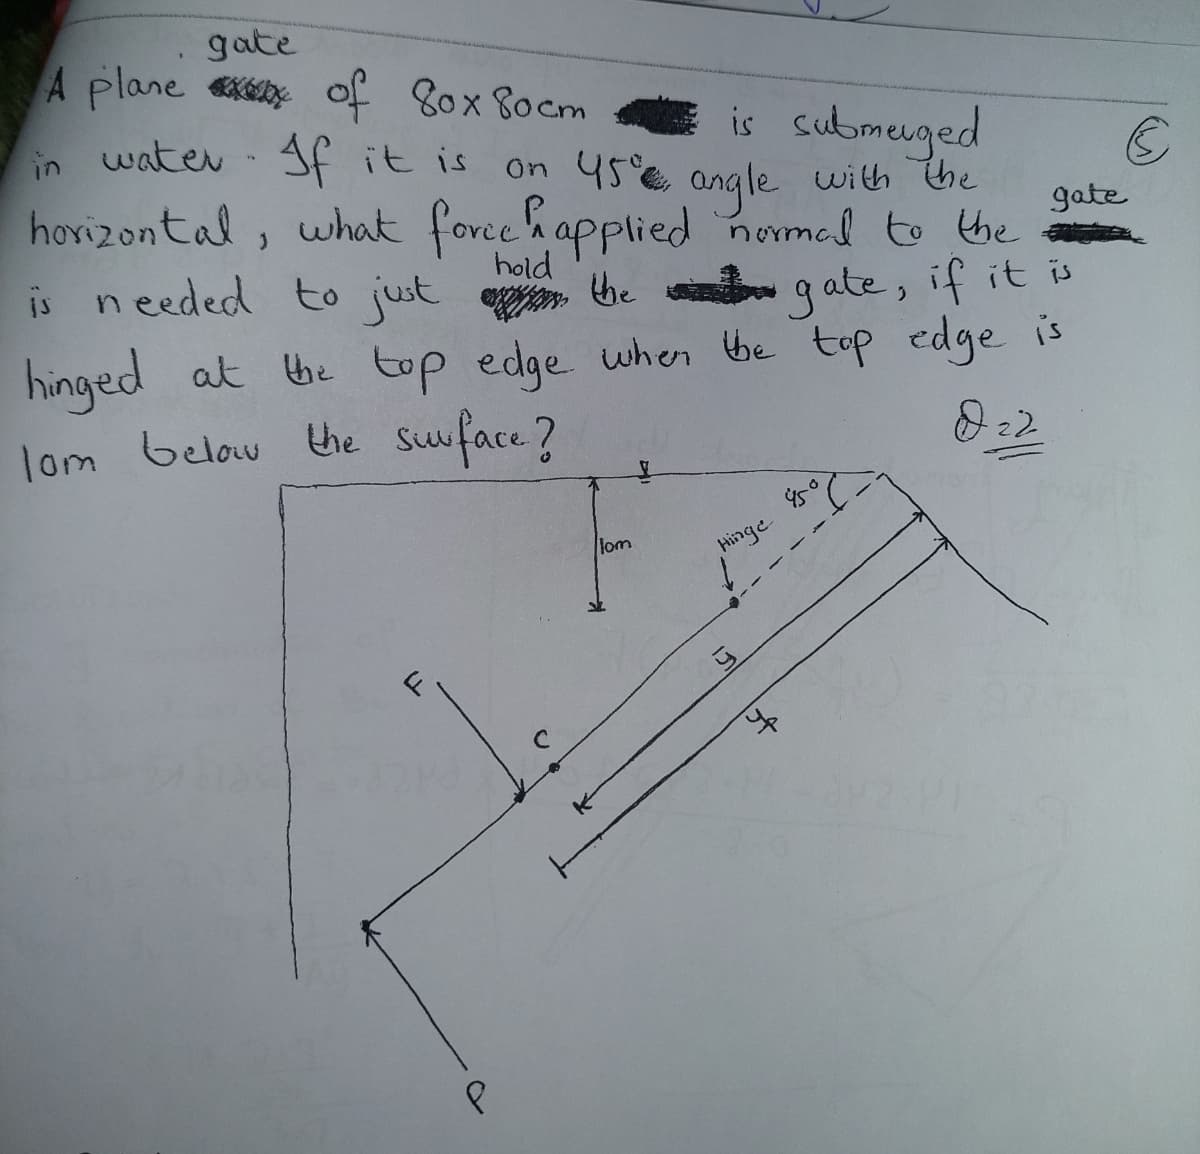 gate
A plane x of 80x 80cm
E is submeuged
On 45 angle with he
hovizontal, what force happlied nomad to the
in watev- f it is
gate
hold
is needed to just
e he q ate, if it is
hinged at be top edge wher he top edge is
lom below the Suface?
lom
Hinge
